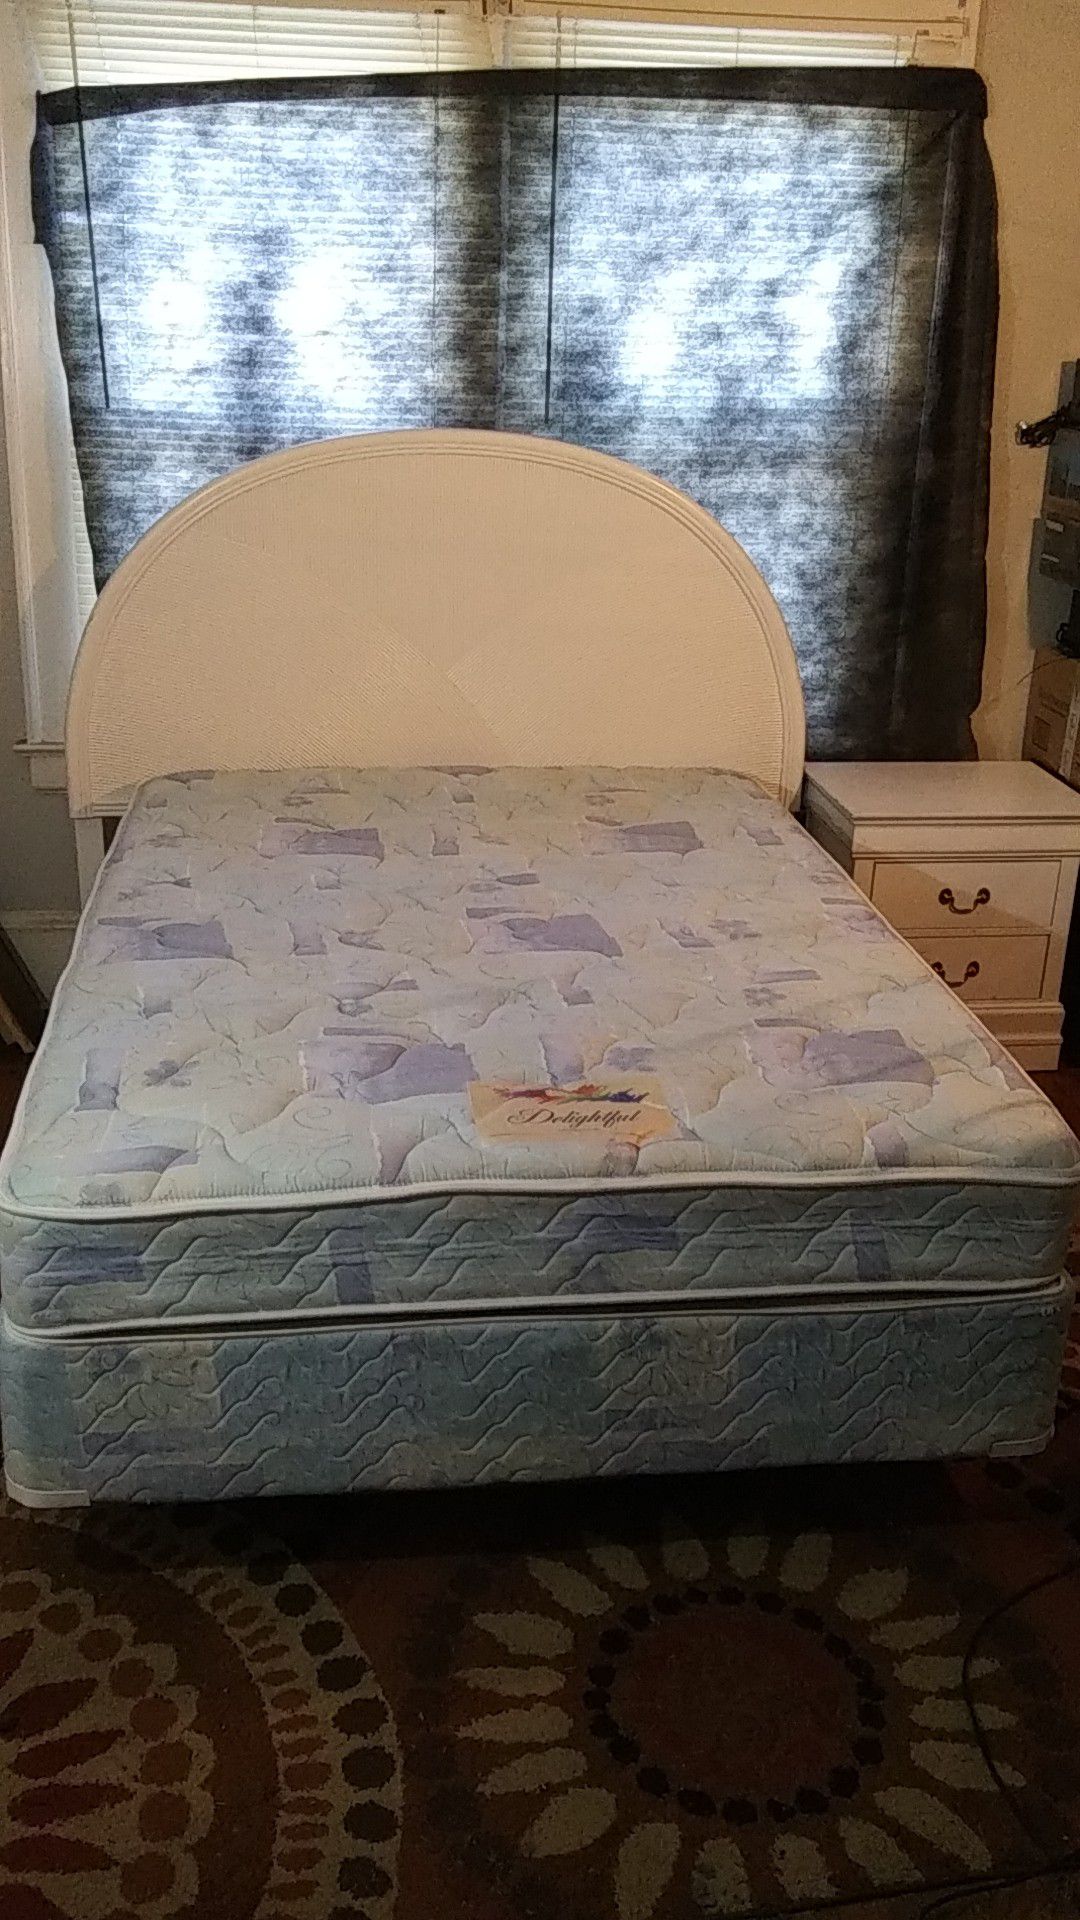 Full size bed complete! Headboard, metal frame Super clean mattress. No stains! Reduced $150 to $125. Can have nightstand free with bed.